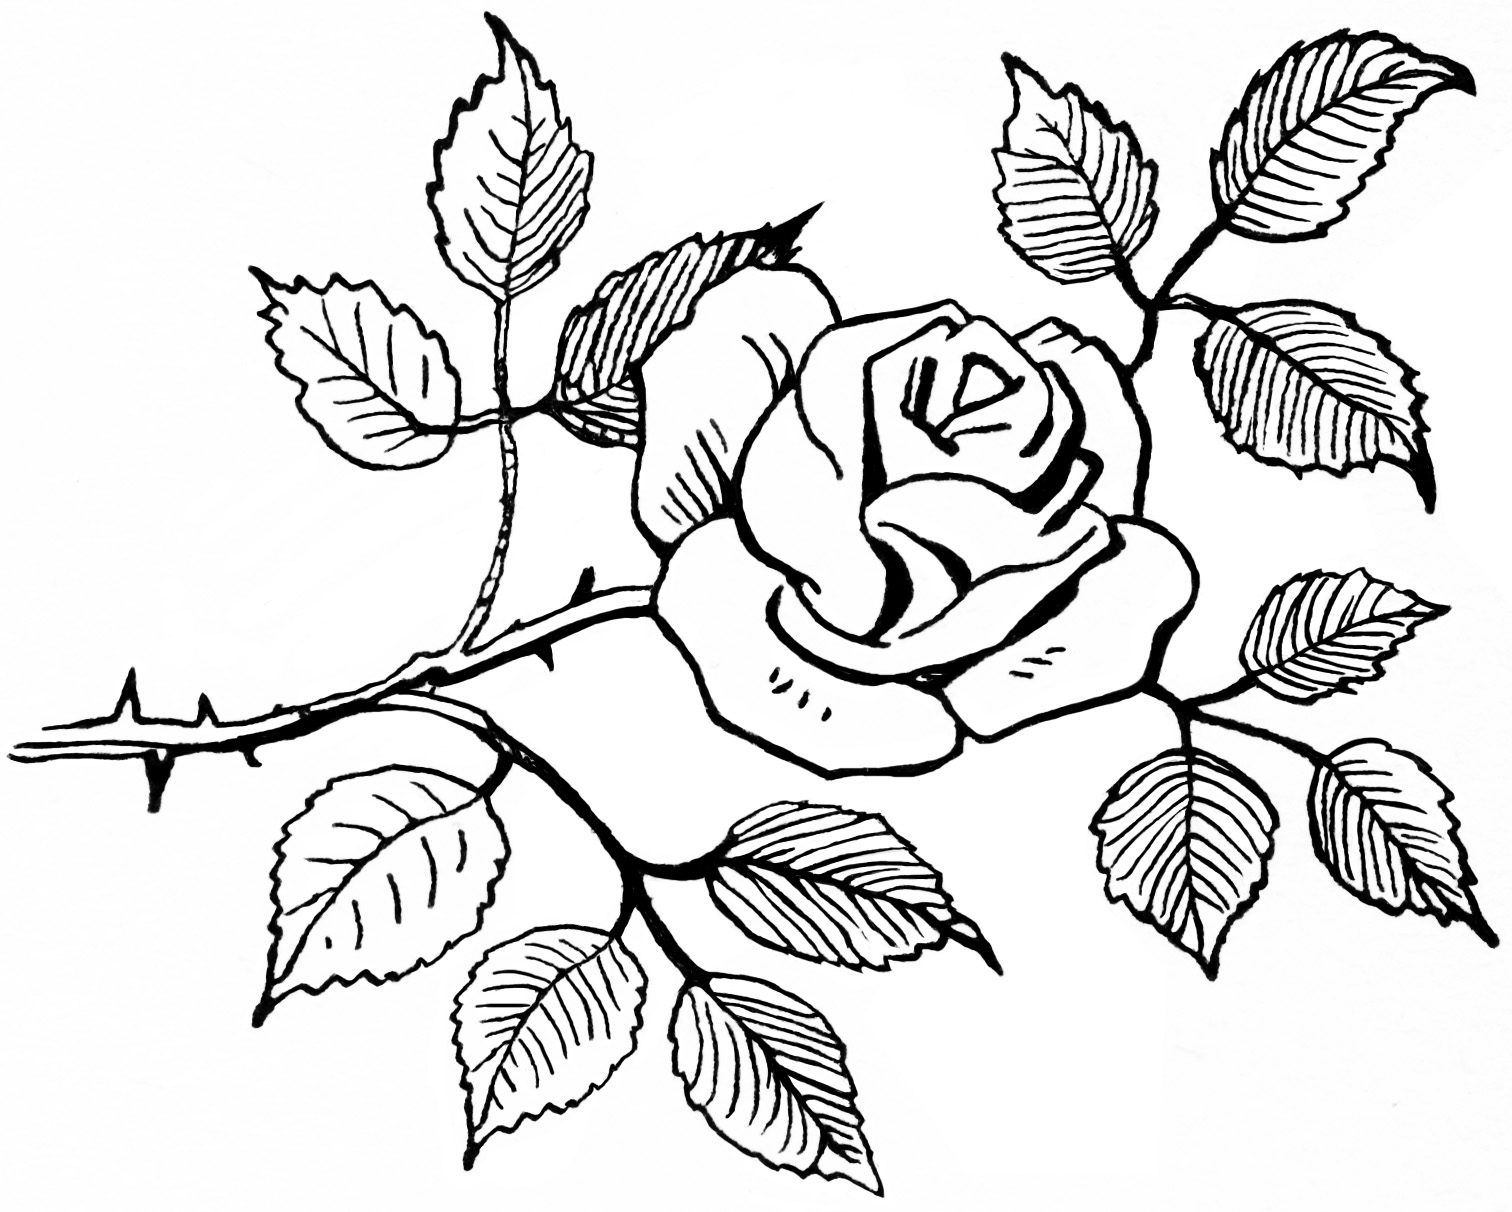 Rose Sketch Black And White - Clipart library